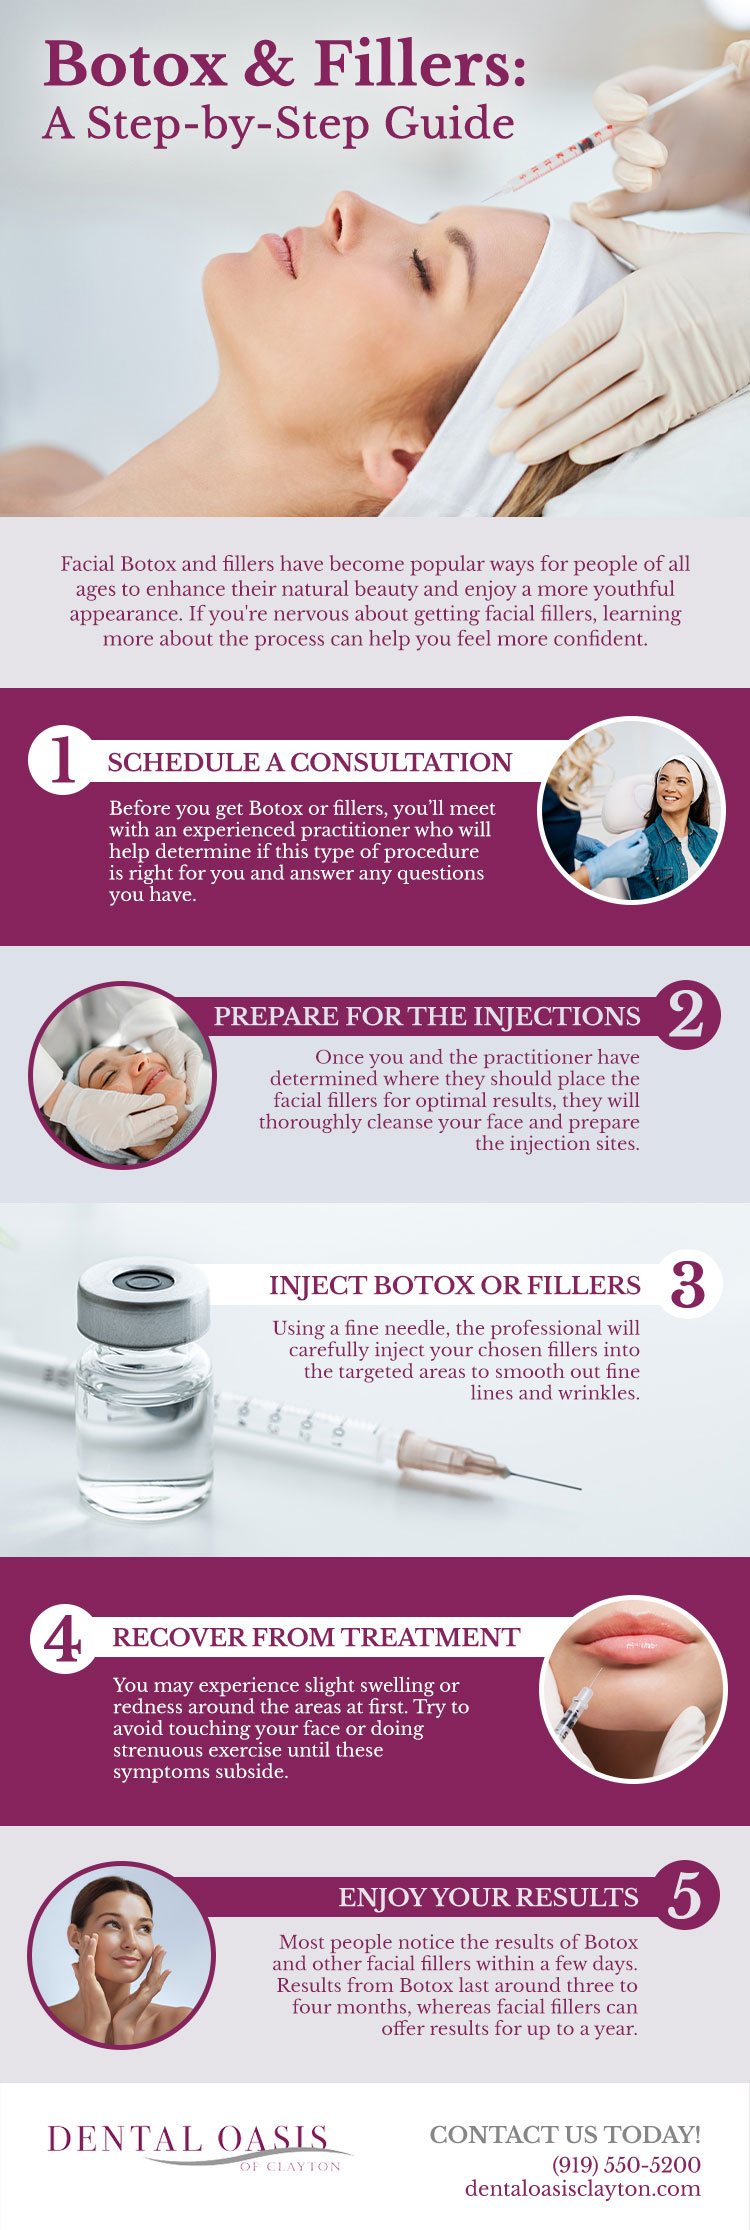 Botox & Fillers: A Step-by-Step Guide for Prospective Clients